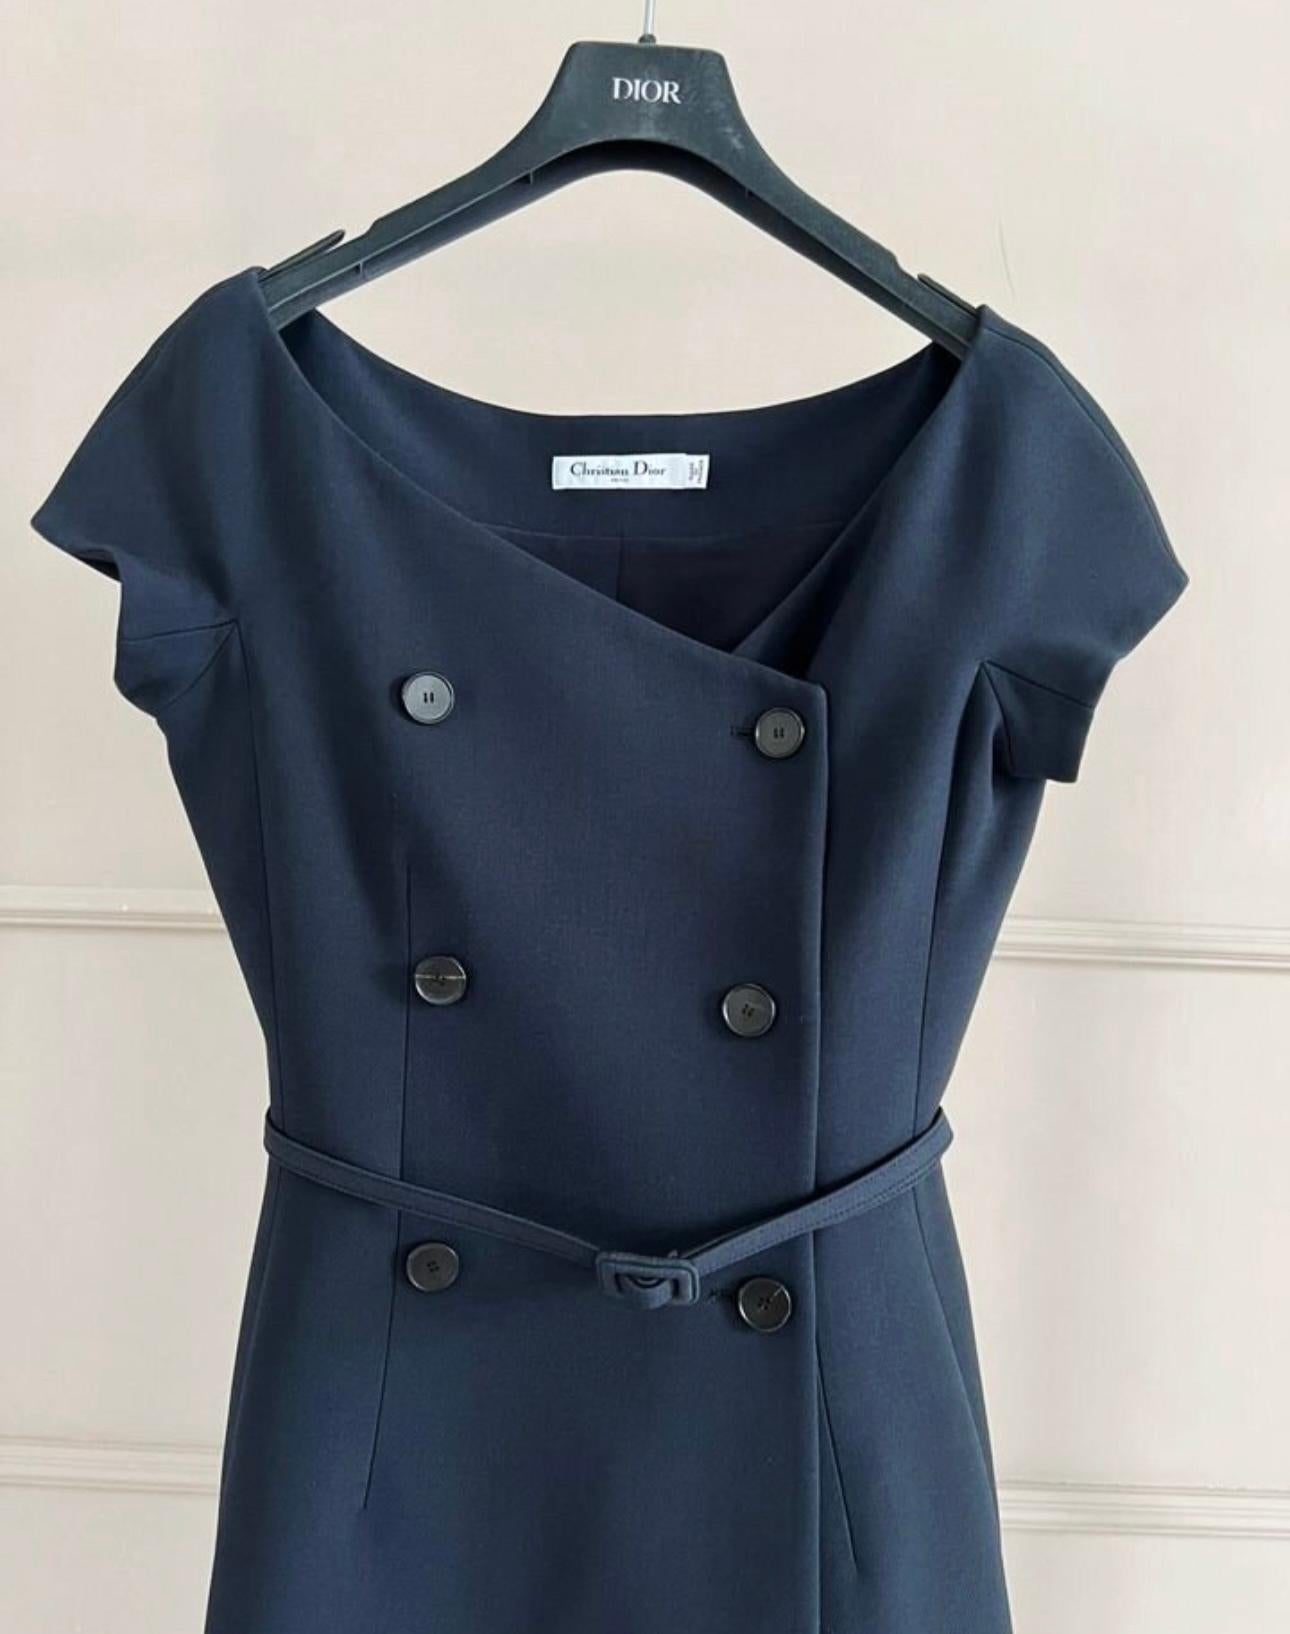 Dior 5K$ Iconic Dark Navy Double Breasted Dress 1